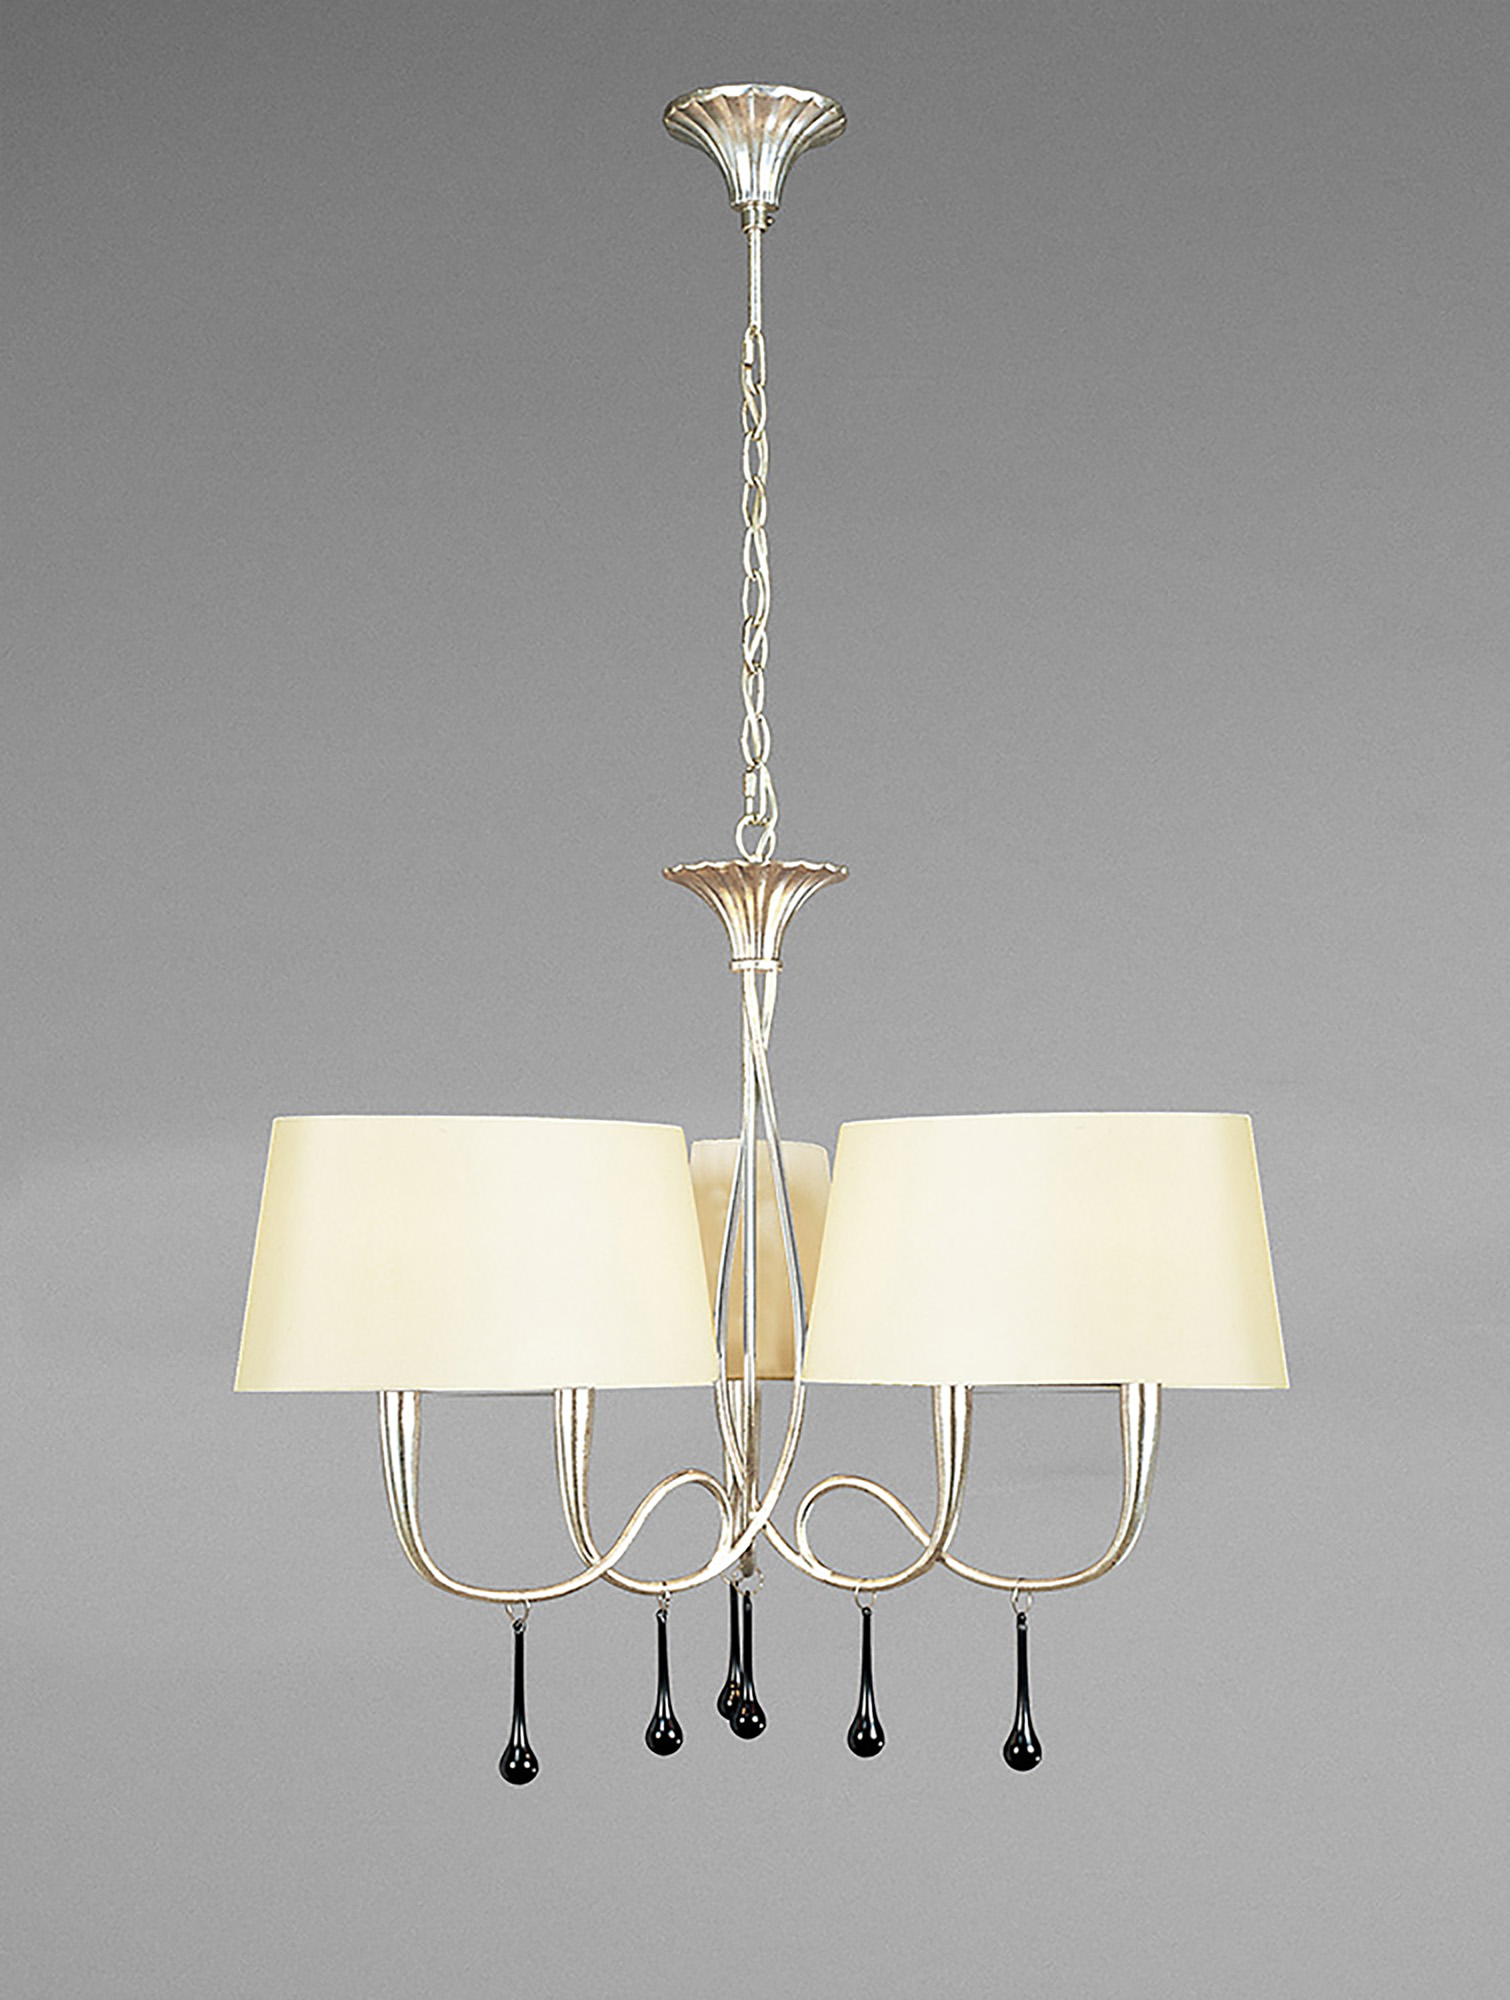 Paola Silver-Cream Ceiling Lights Mantra Multi Arm Fittings